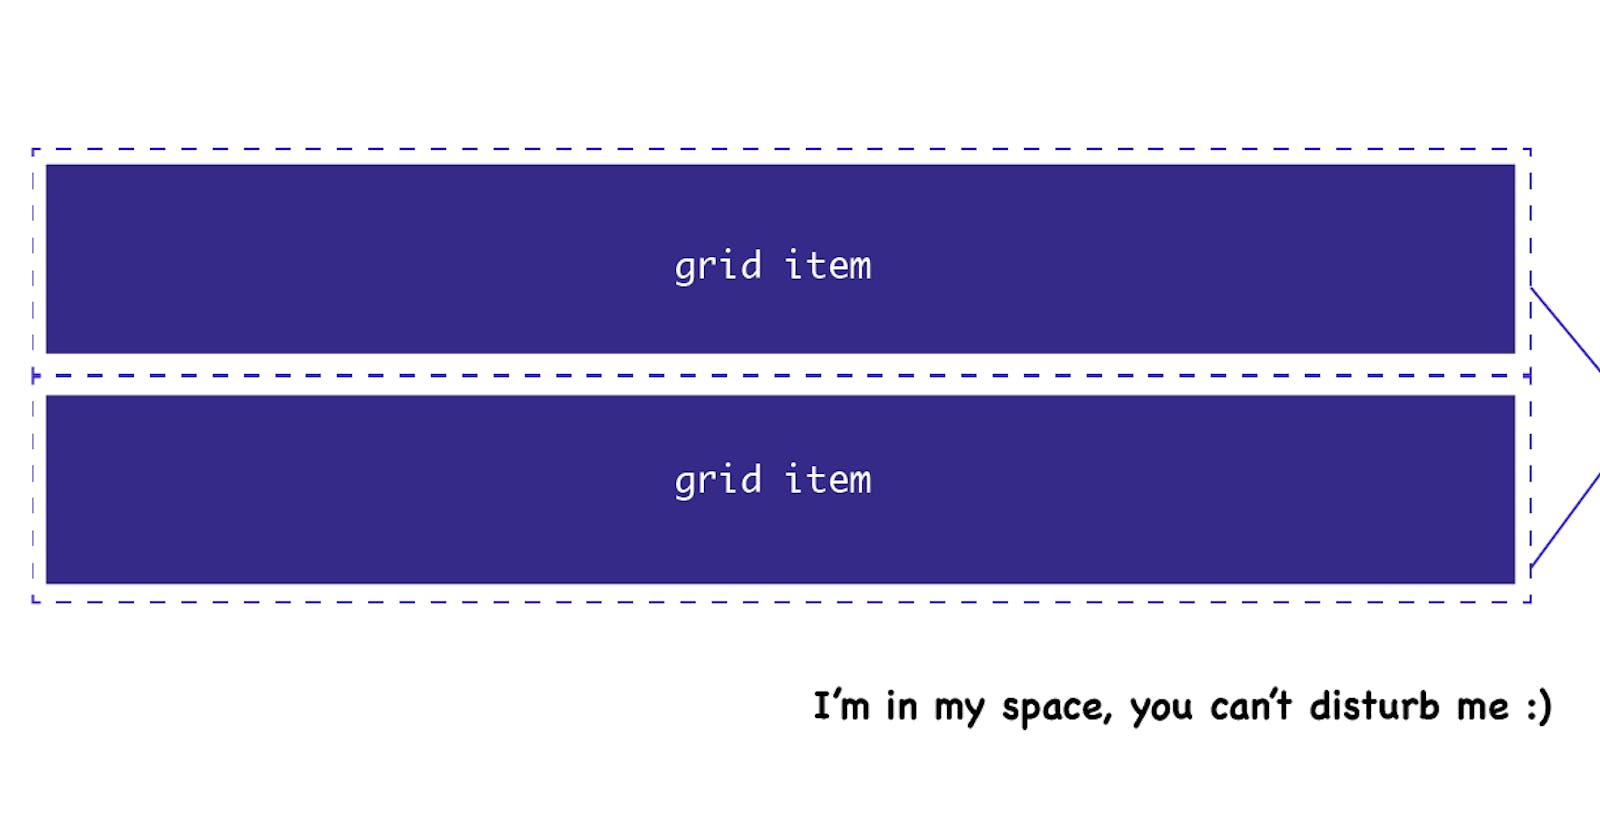 Gride-template-areas (CSS gird property)